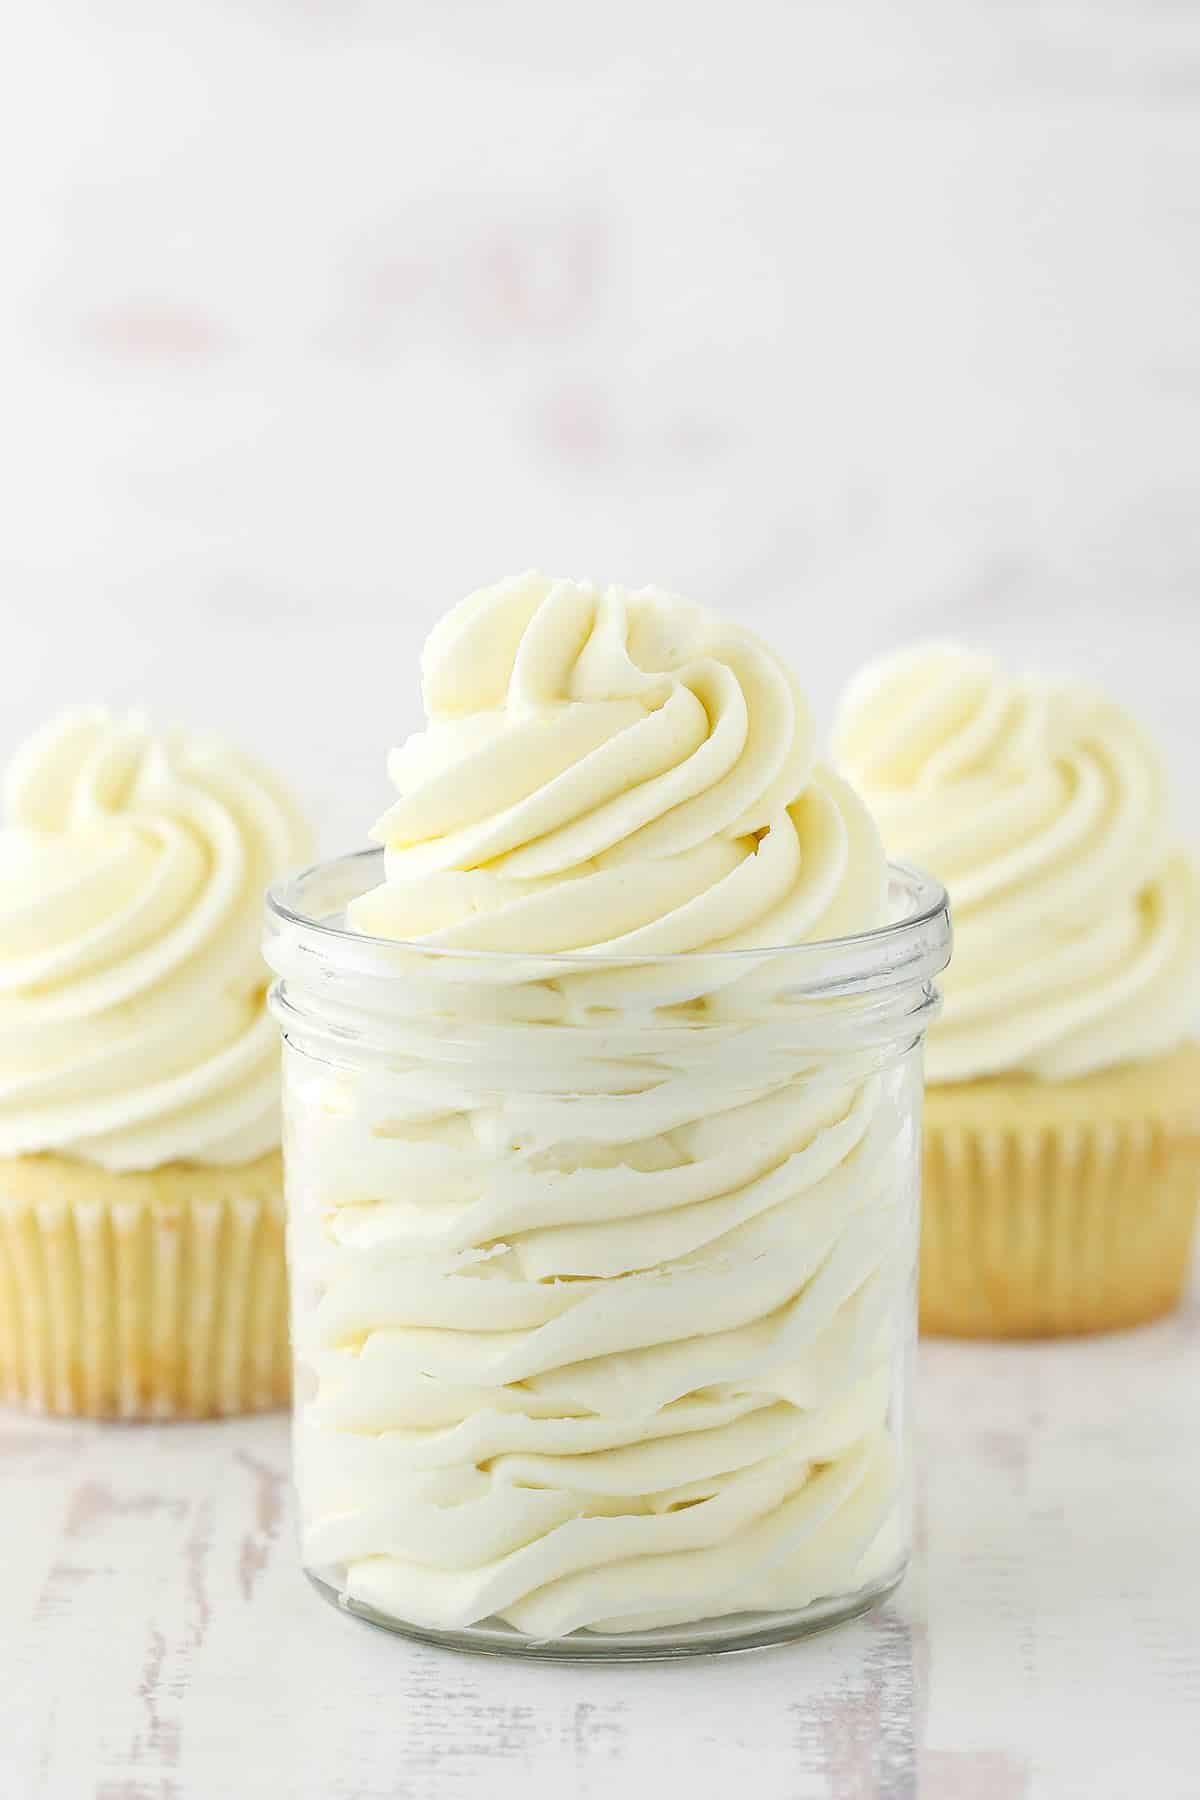 ermine frosting piped into glass jar with two frosted cupcakes in the background